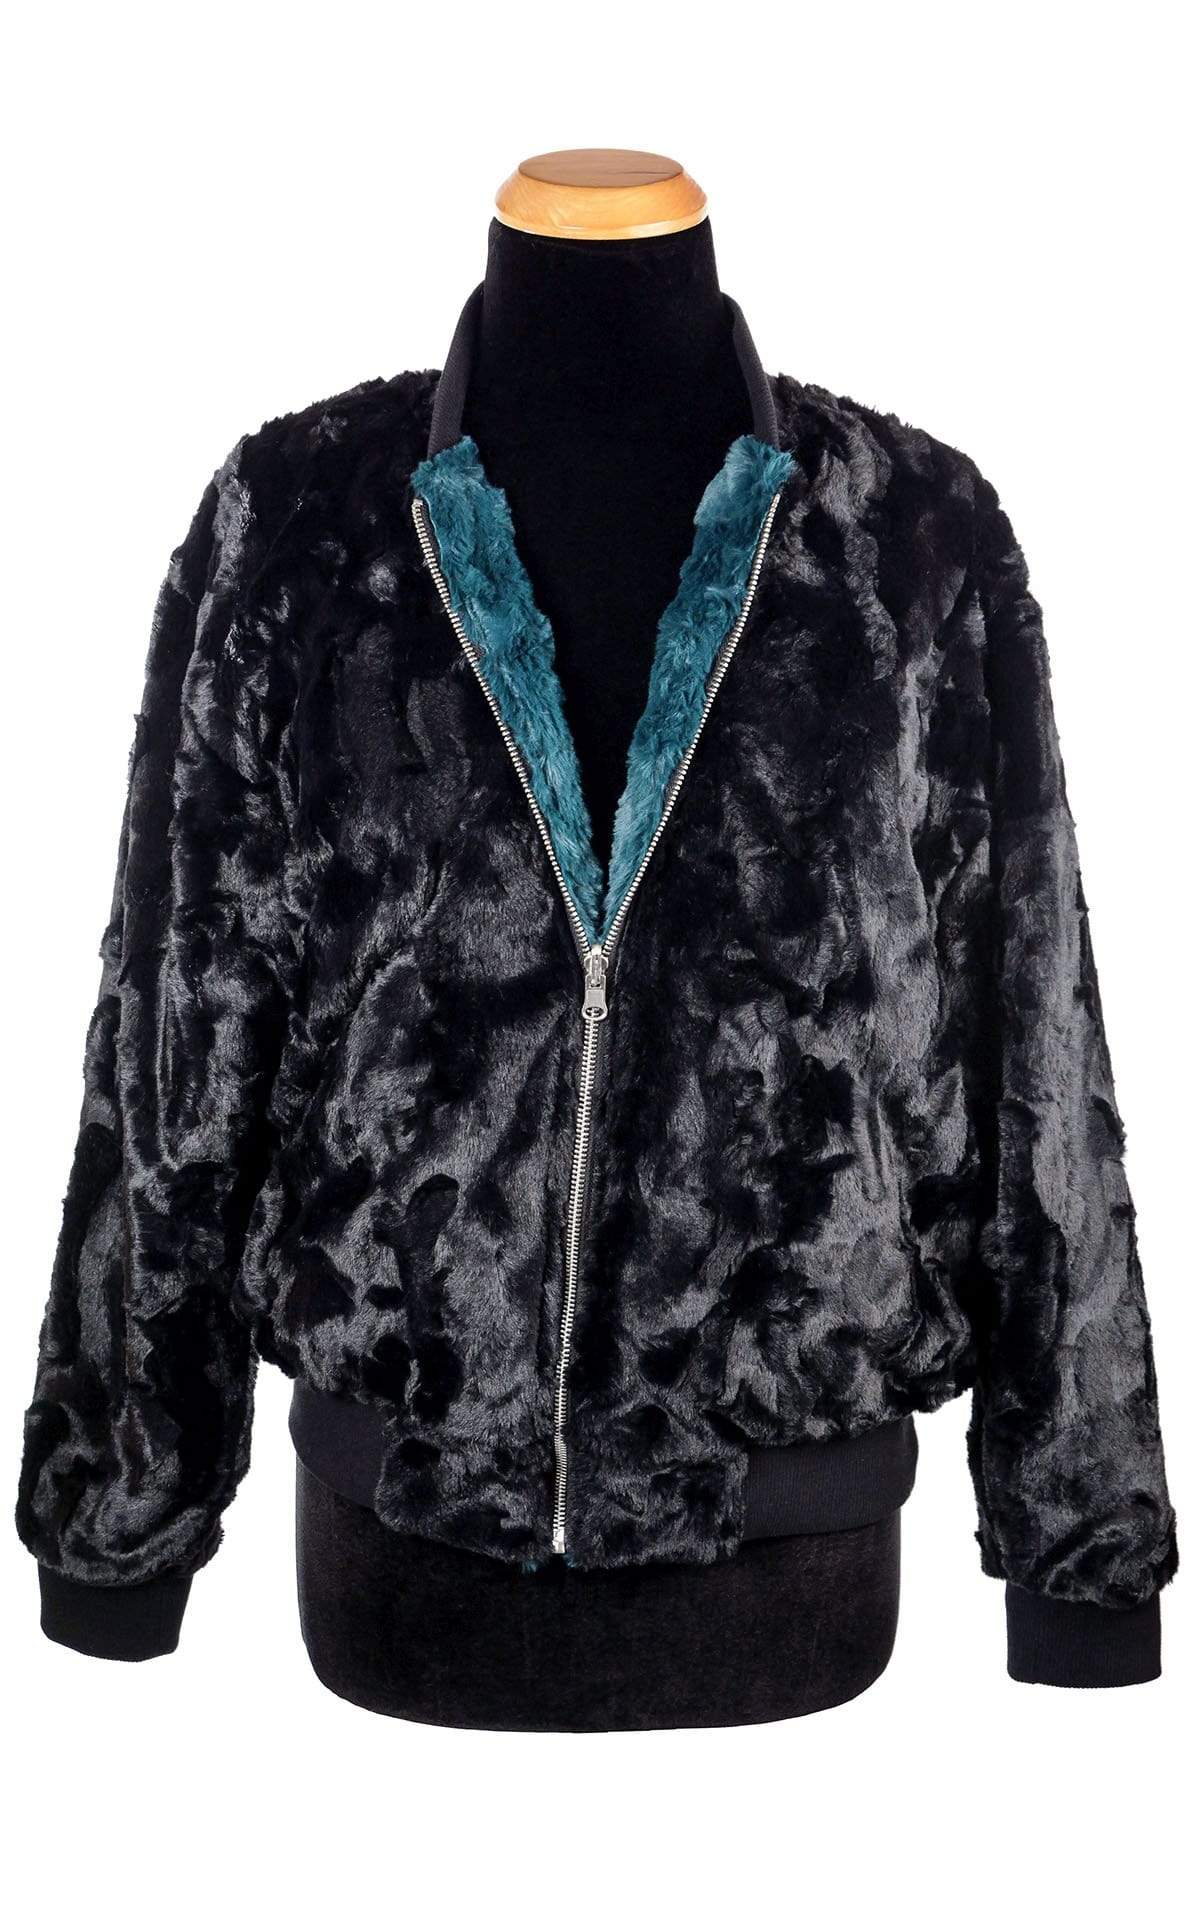 Reversible Amelia Bomber Jacket in Peacock Pond Blue Faux Fur and Black Faux Fur, showing pockets | Handmade in Seattle WA| Pandemonium Millinery